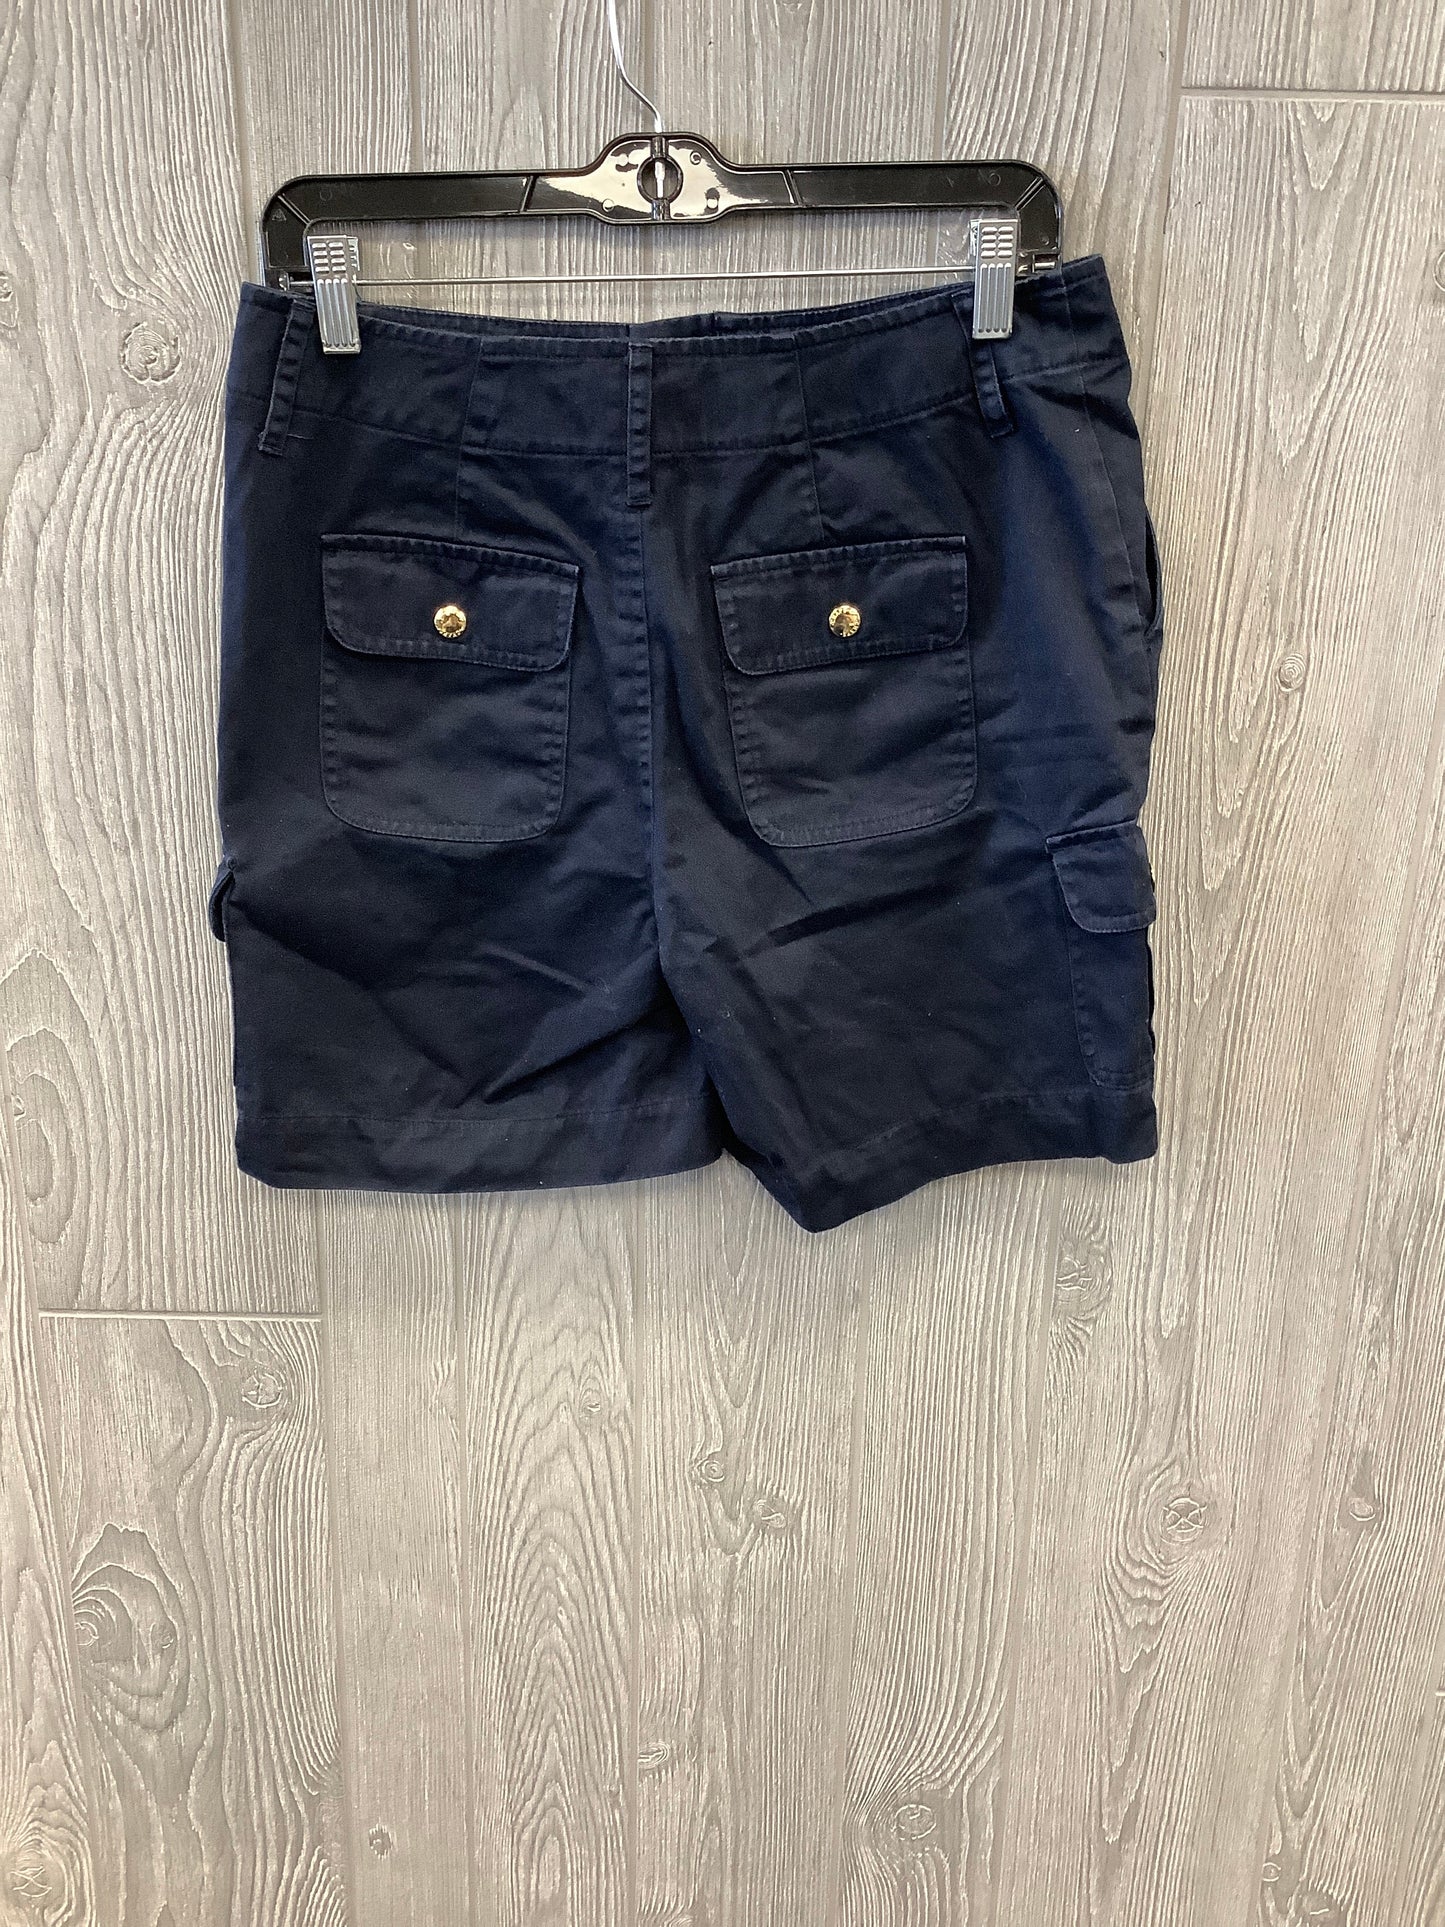 Shorts By Chaps  Size: 4